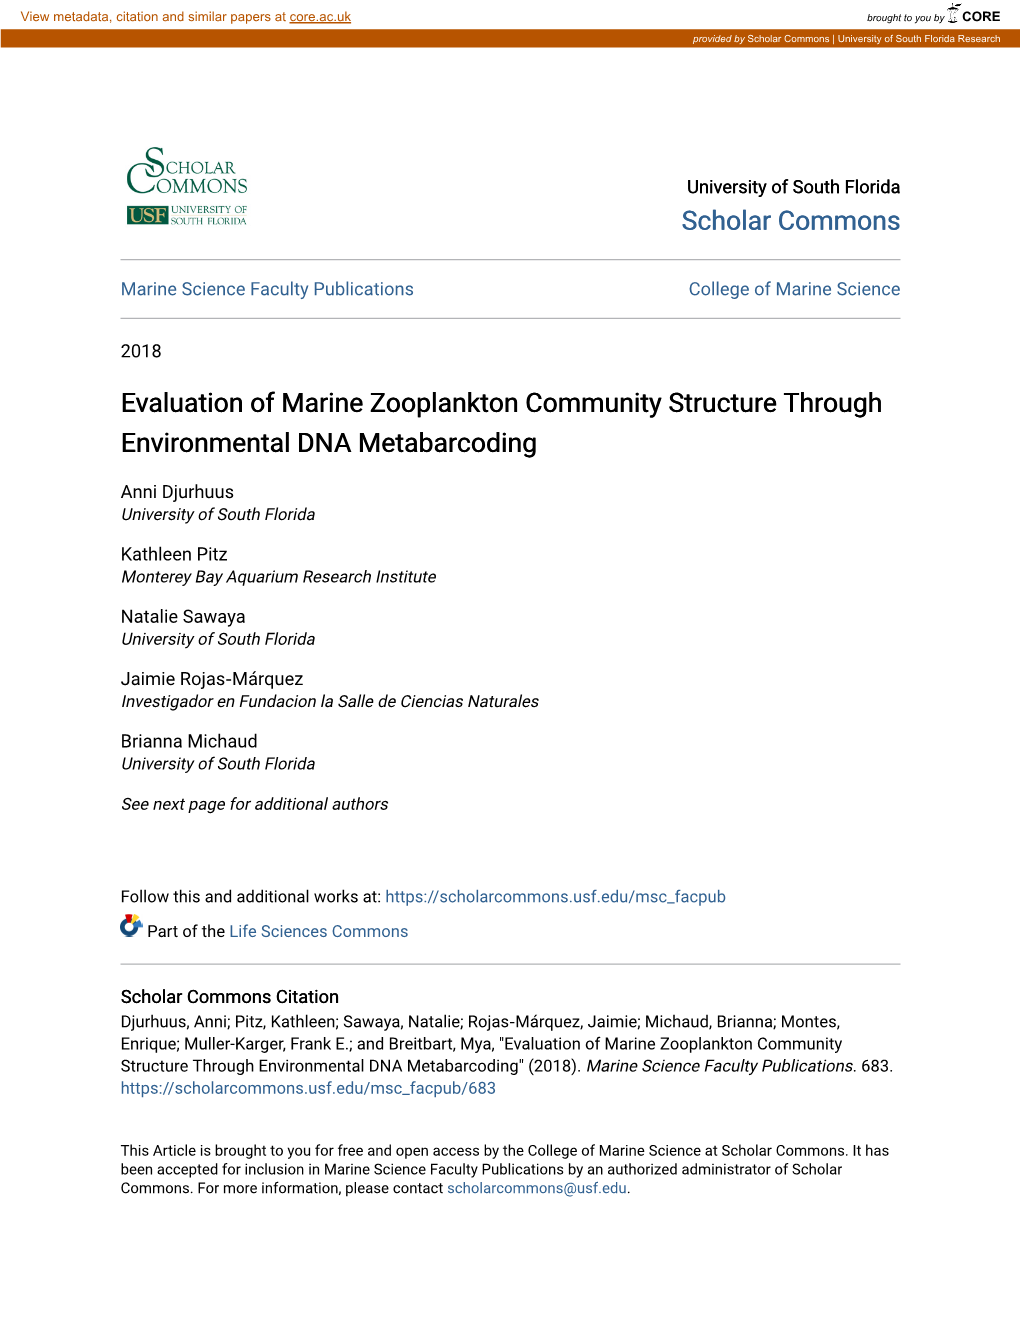 Evaluation of Marine Zooplankton Community Structure Through Environmental DNA Metabarcoding